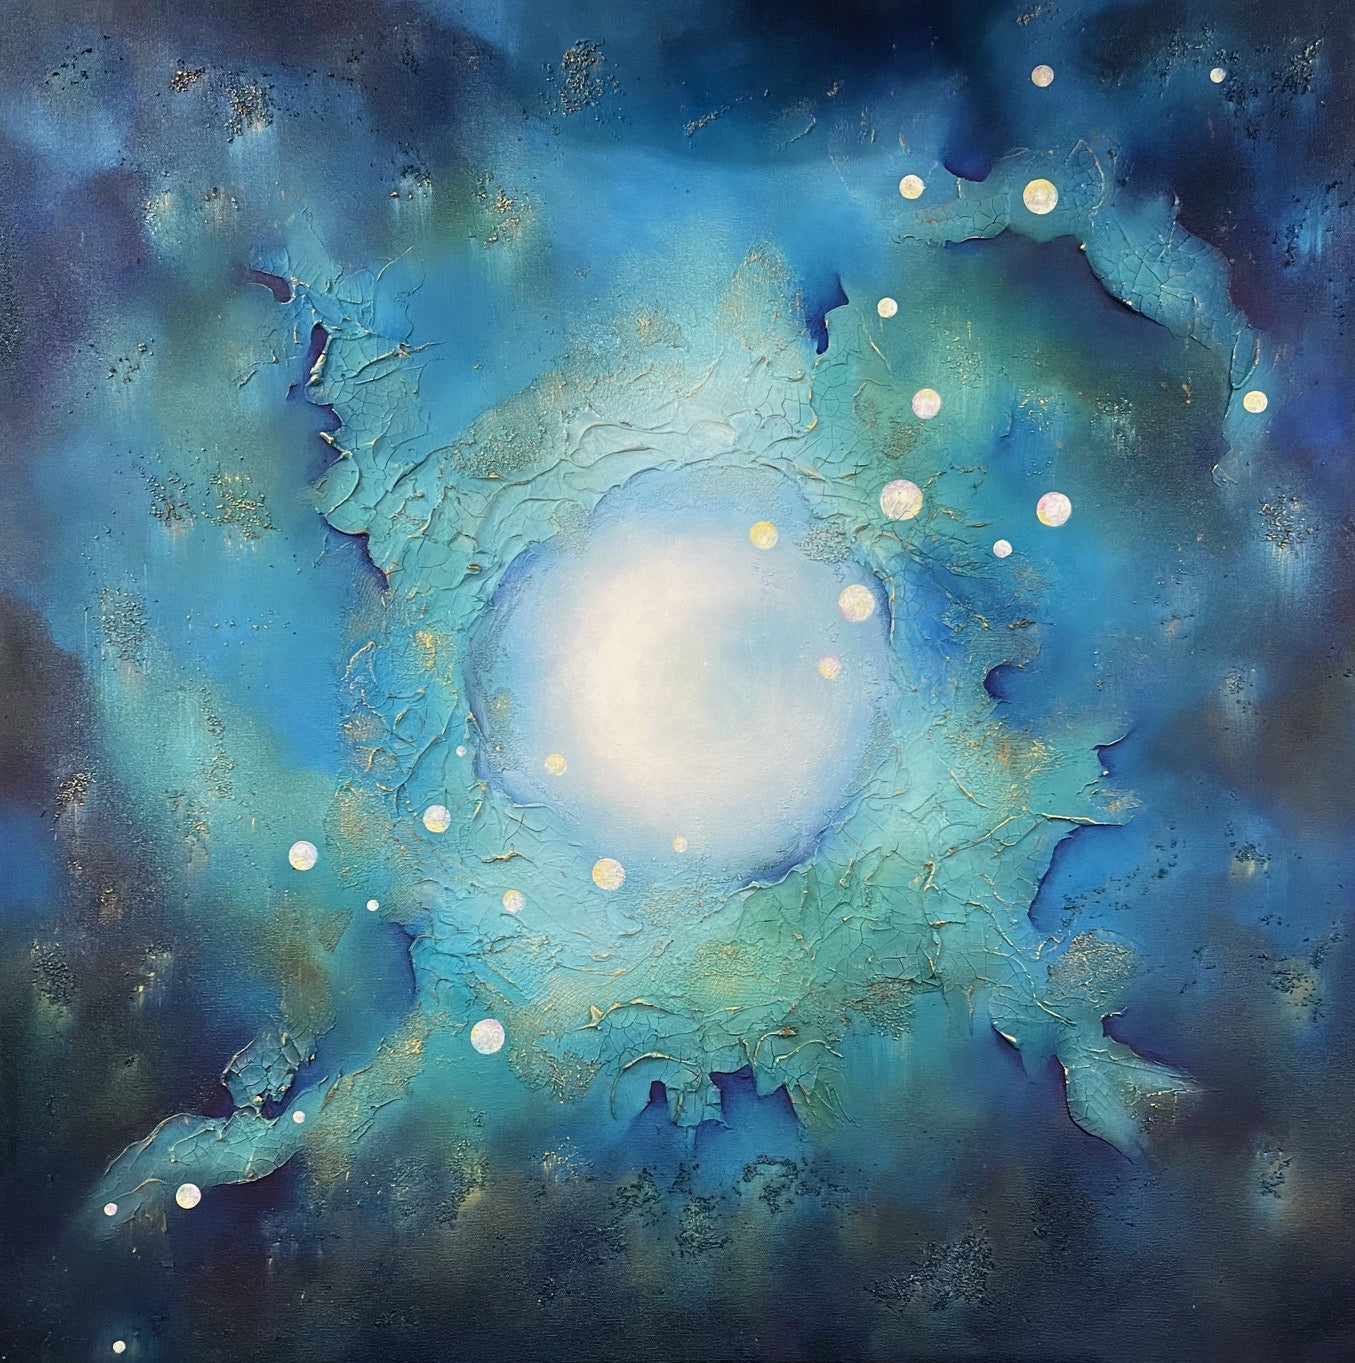 Return to Wholeness, 36x36